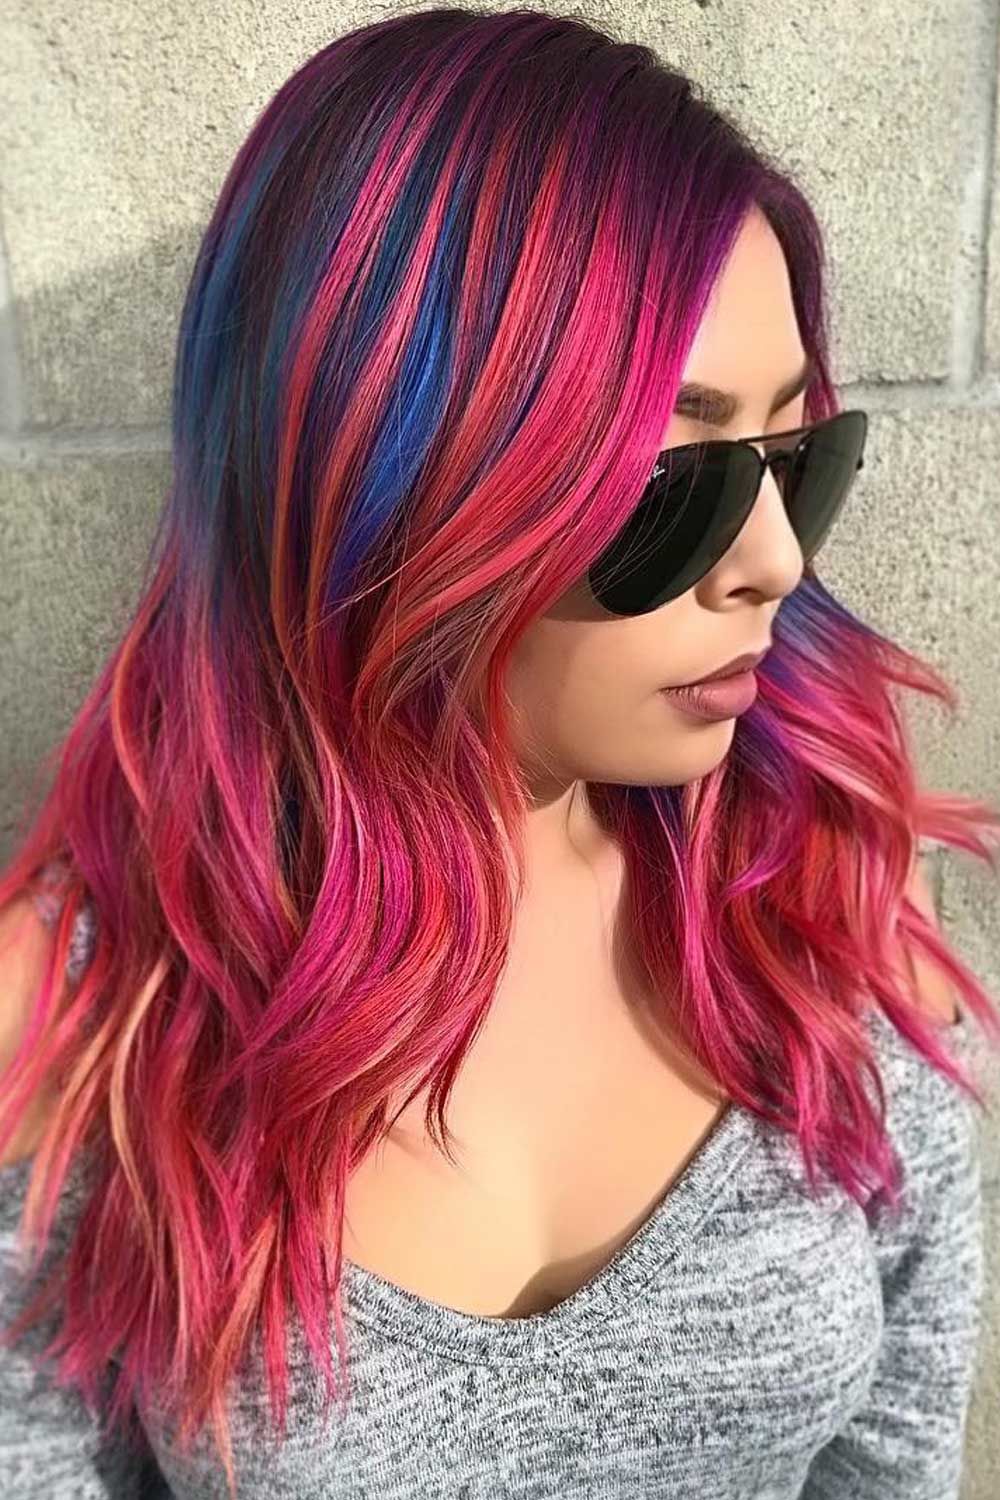 Sunset Hair Guide With Pro Tips And Ideas